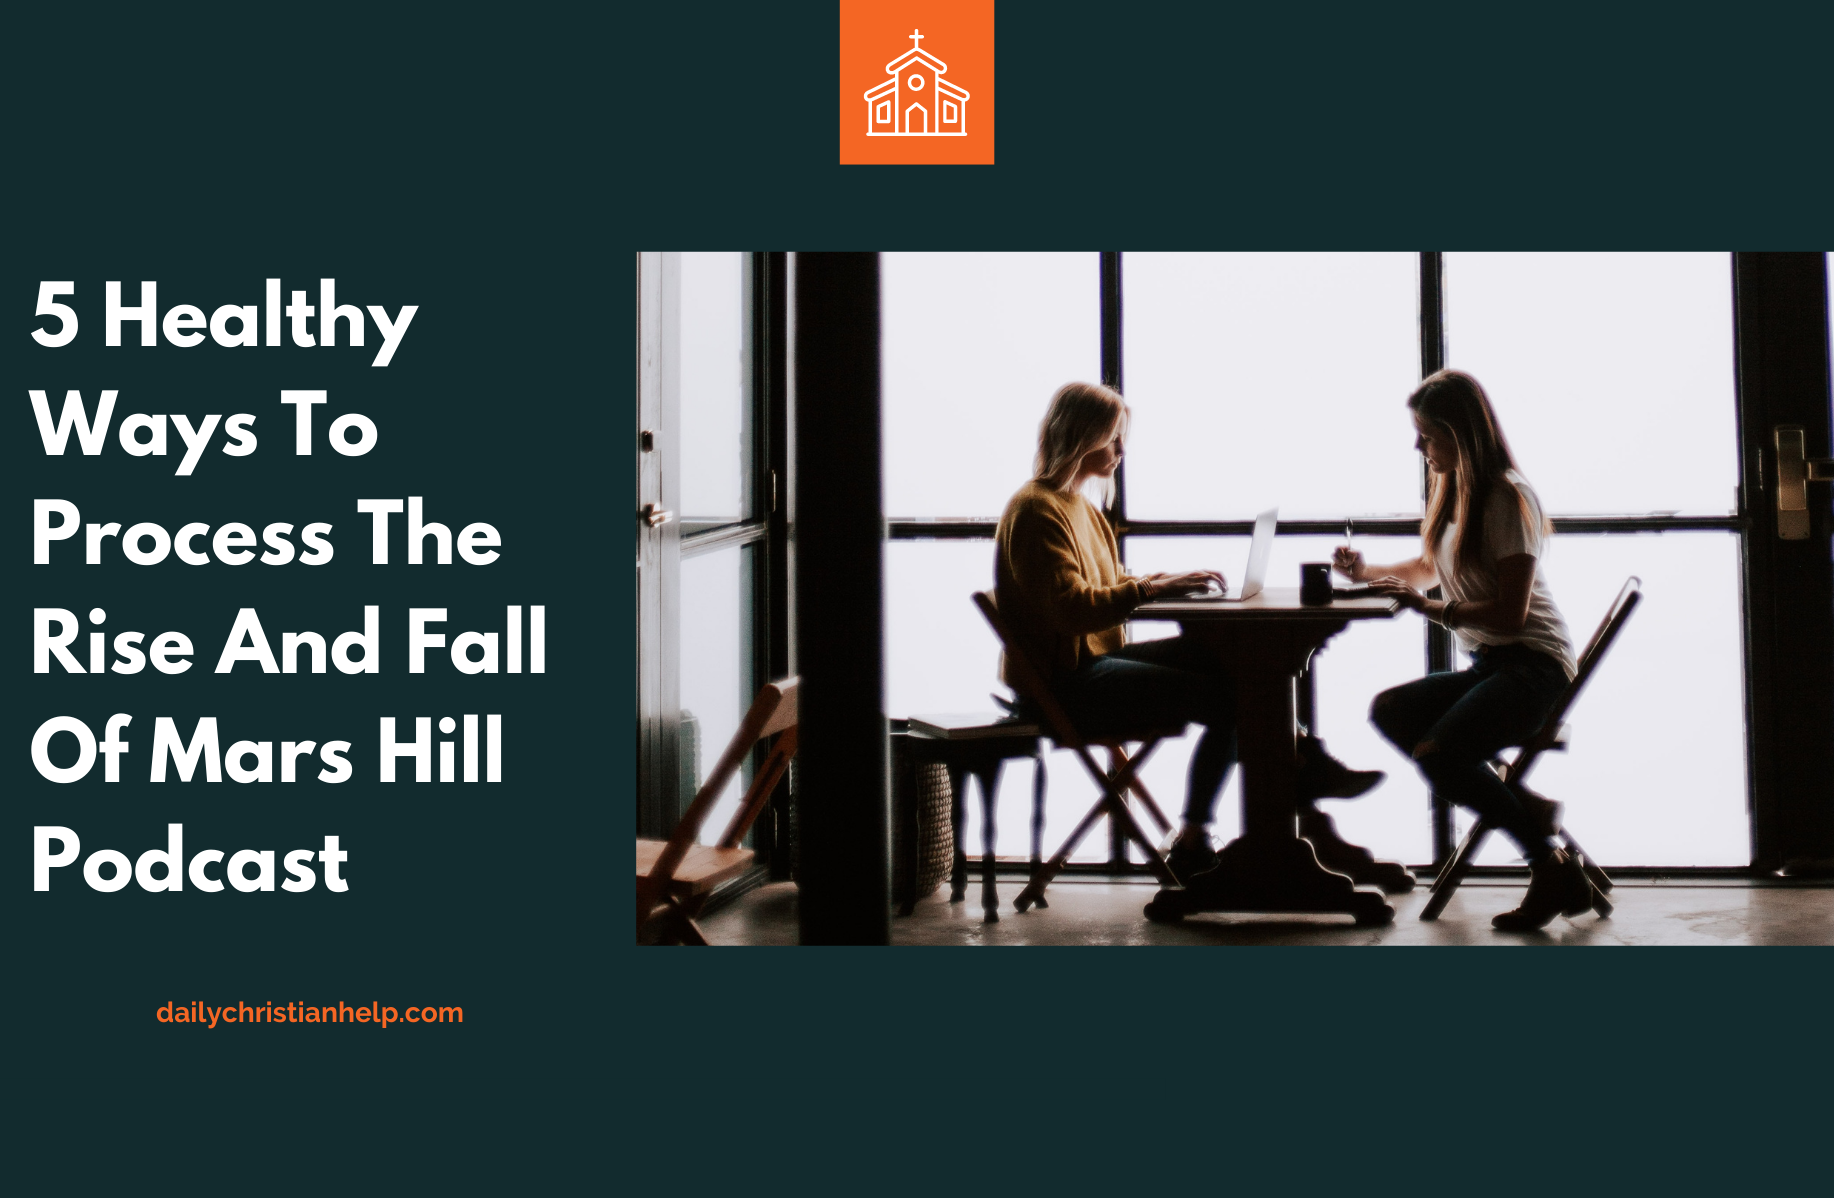 The rise and fall of mars hill